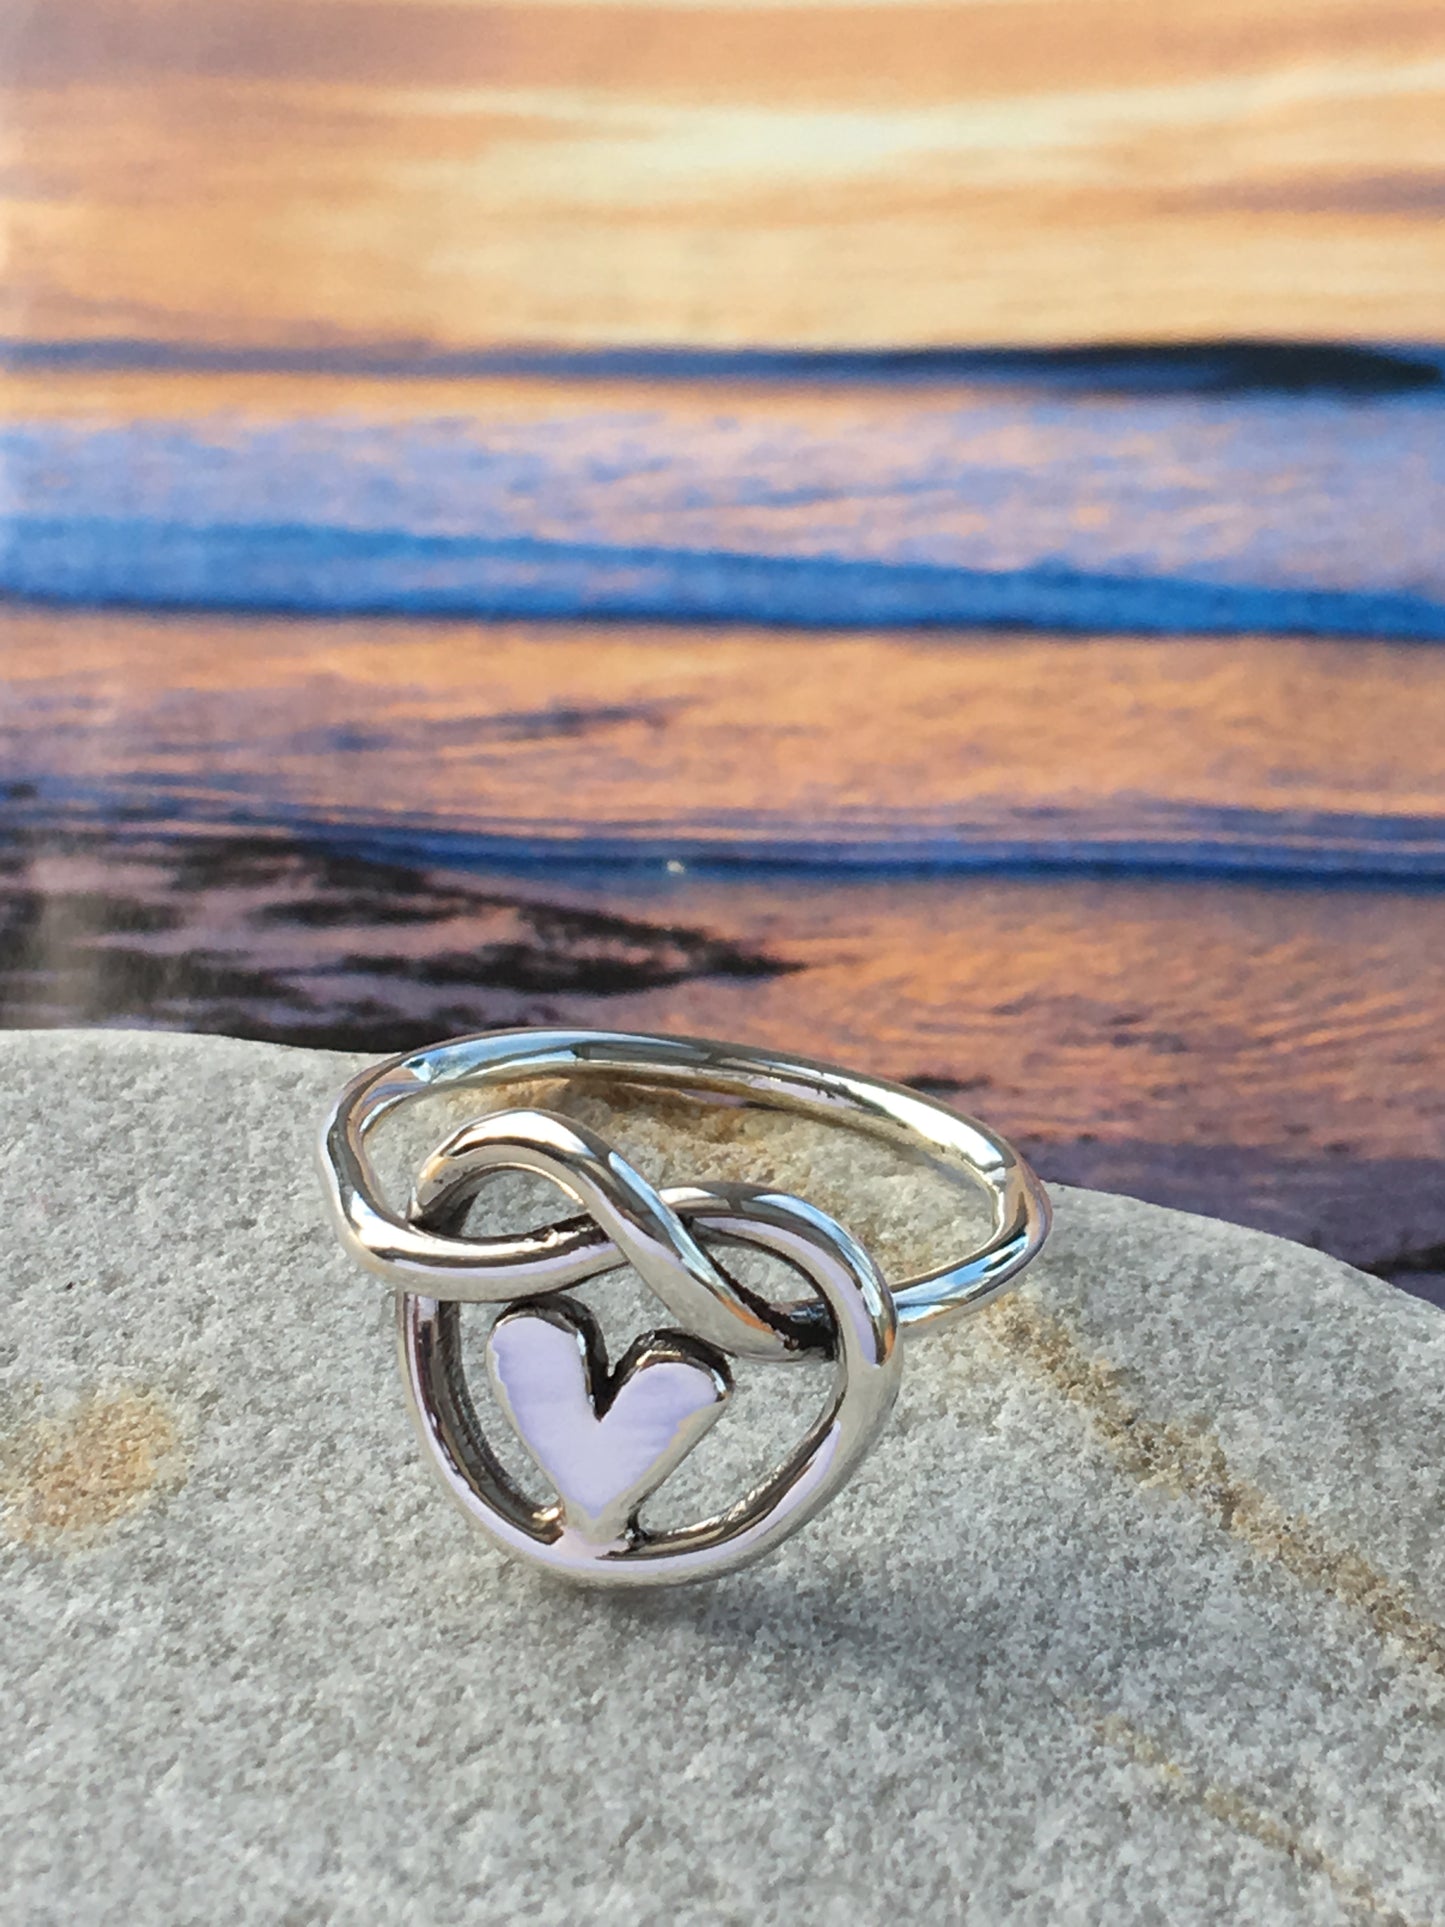 Knot of friendship heart ring